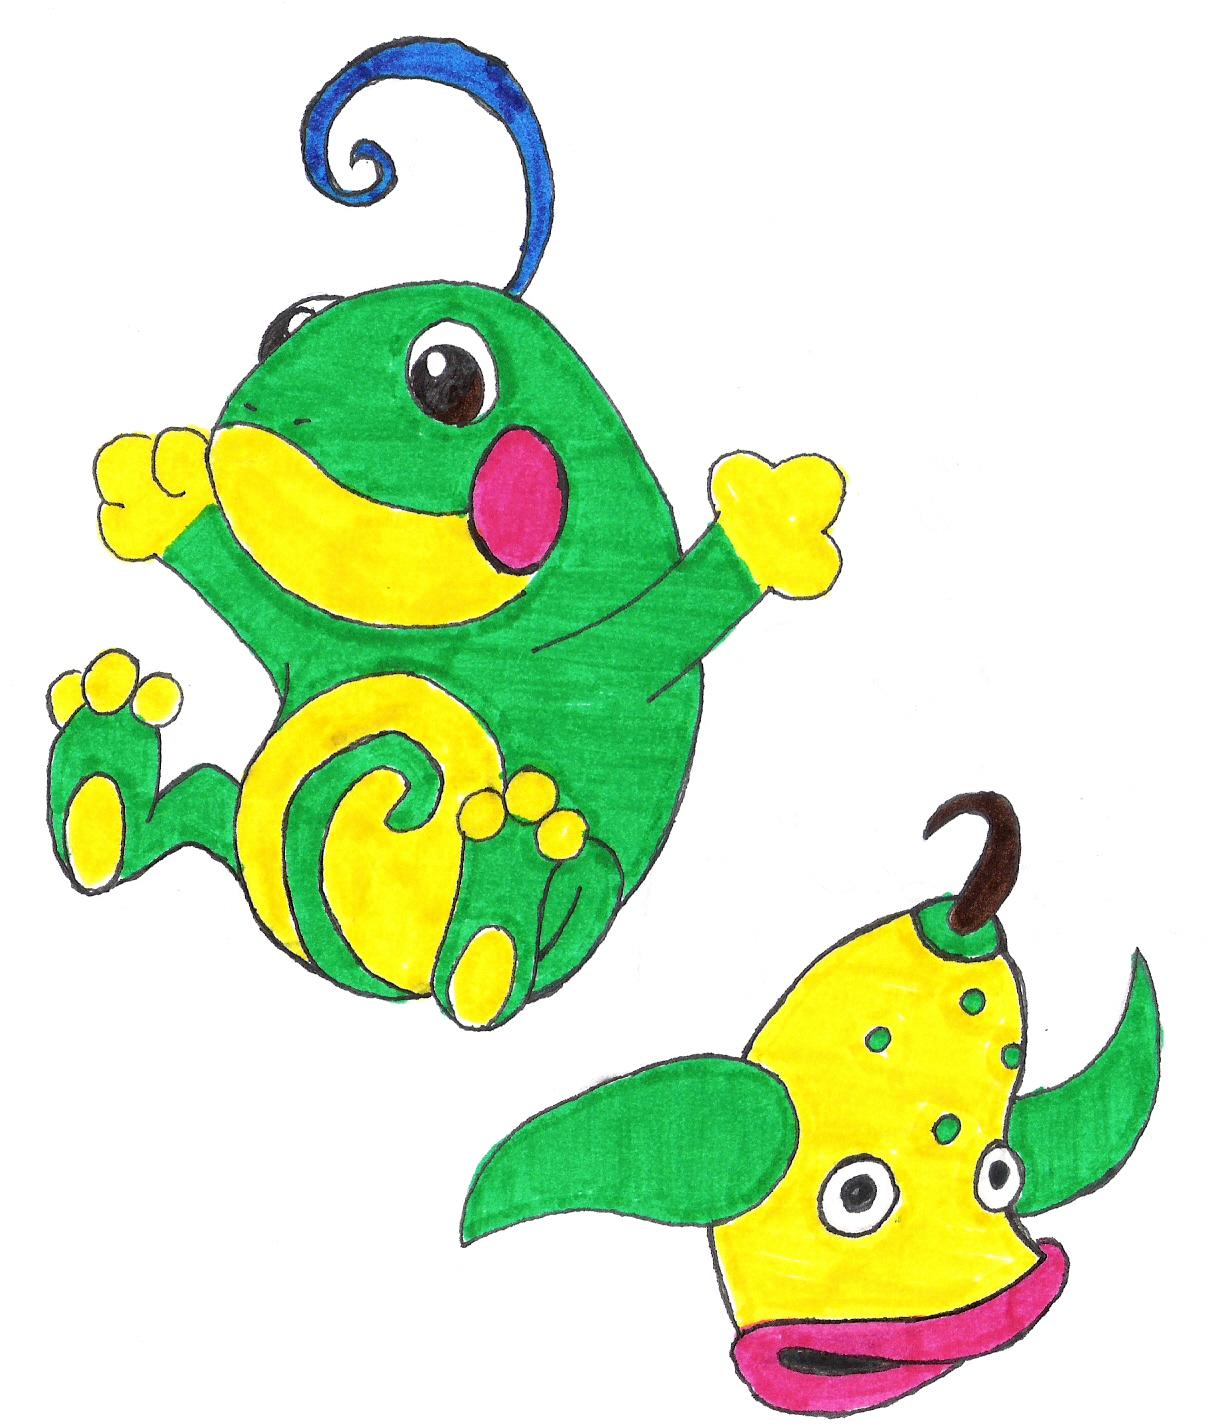 Politoed &amp; Weepinbell by balong